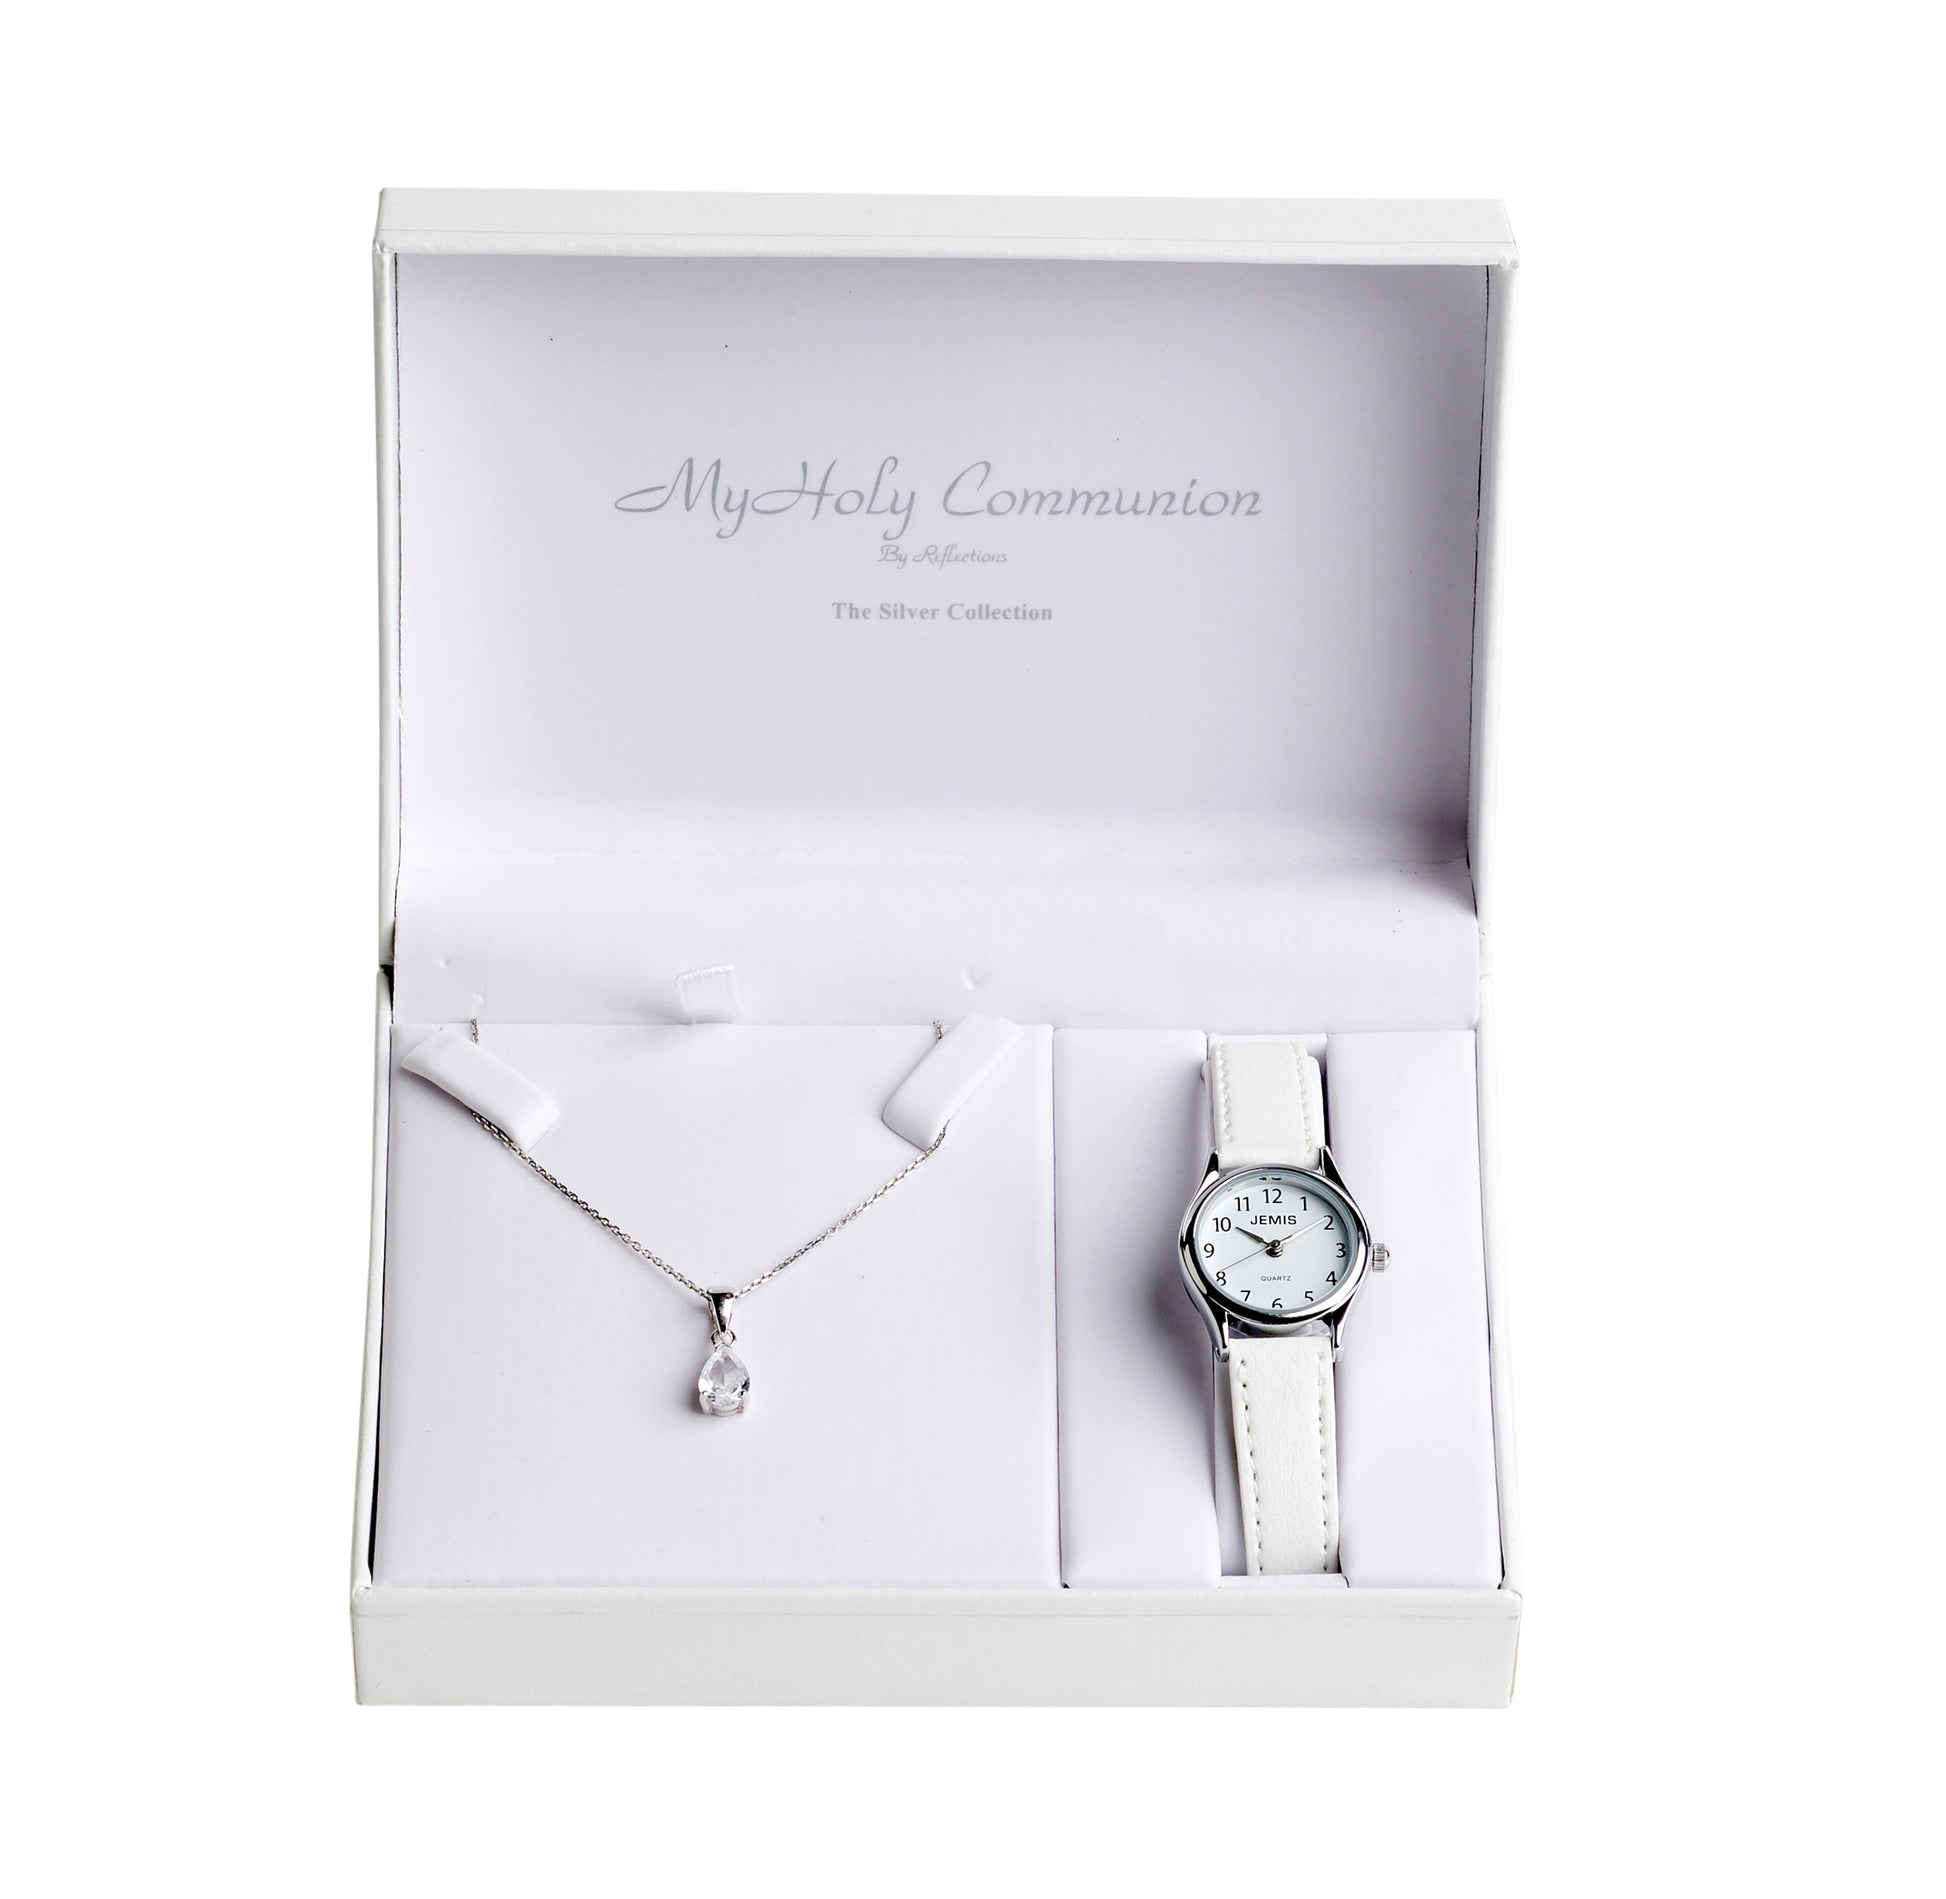 This First Holy Communion gift set comprising of a classic white watch and simple sterling silver pendant include the perfect accessories for any girls special day.   This darling watch with a simple white face and snow white leather strap is set in a silver bezel. Accompanied with the beautiful clear stone pendant, hanging on an adjustable box chain, how could you resist these beauties?!